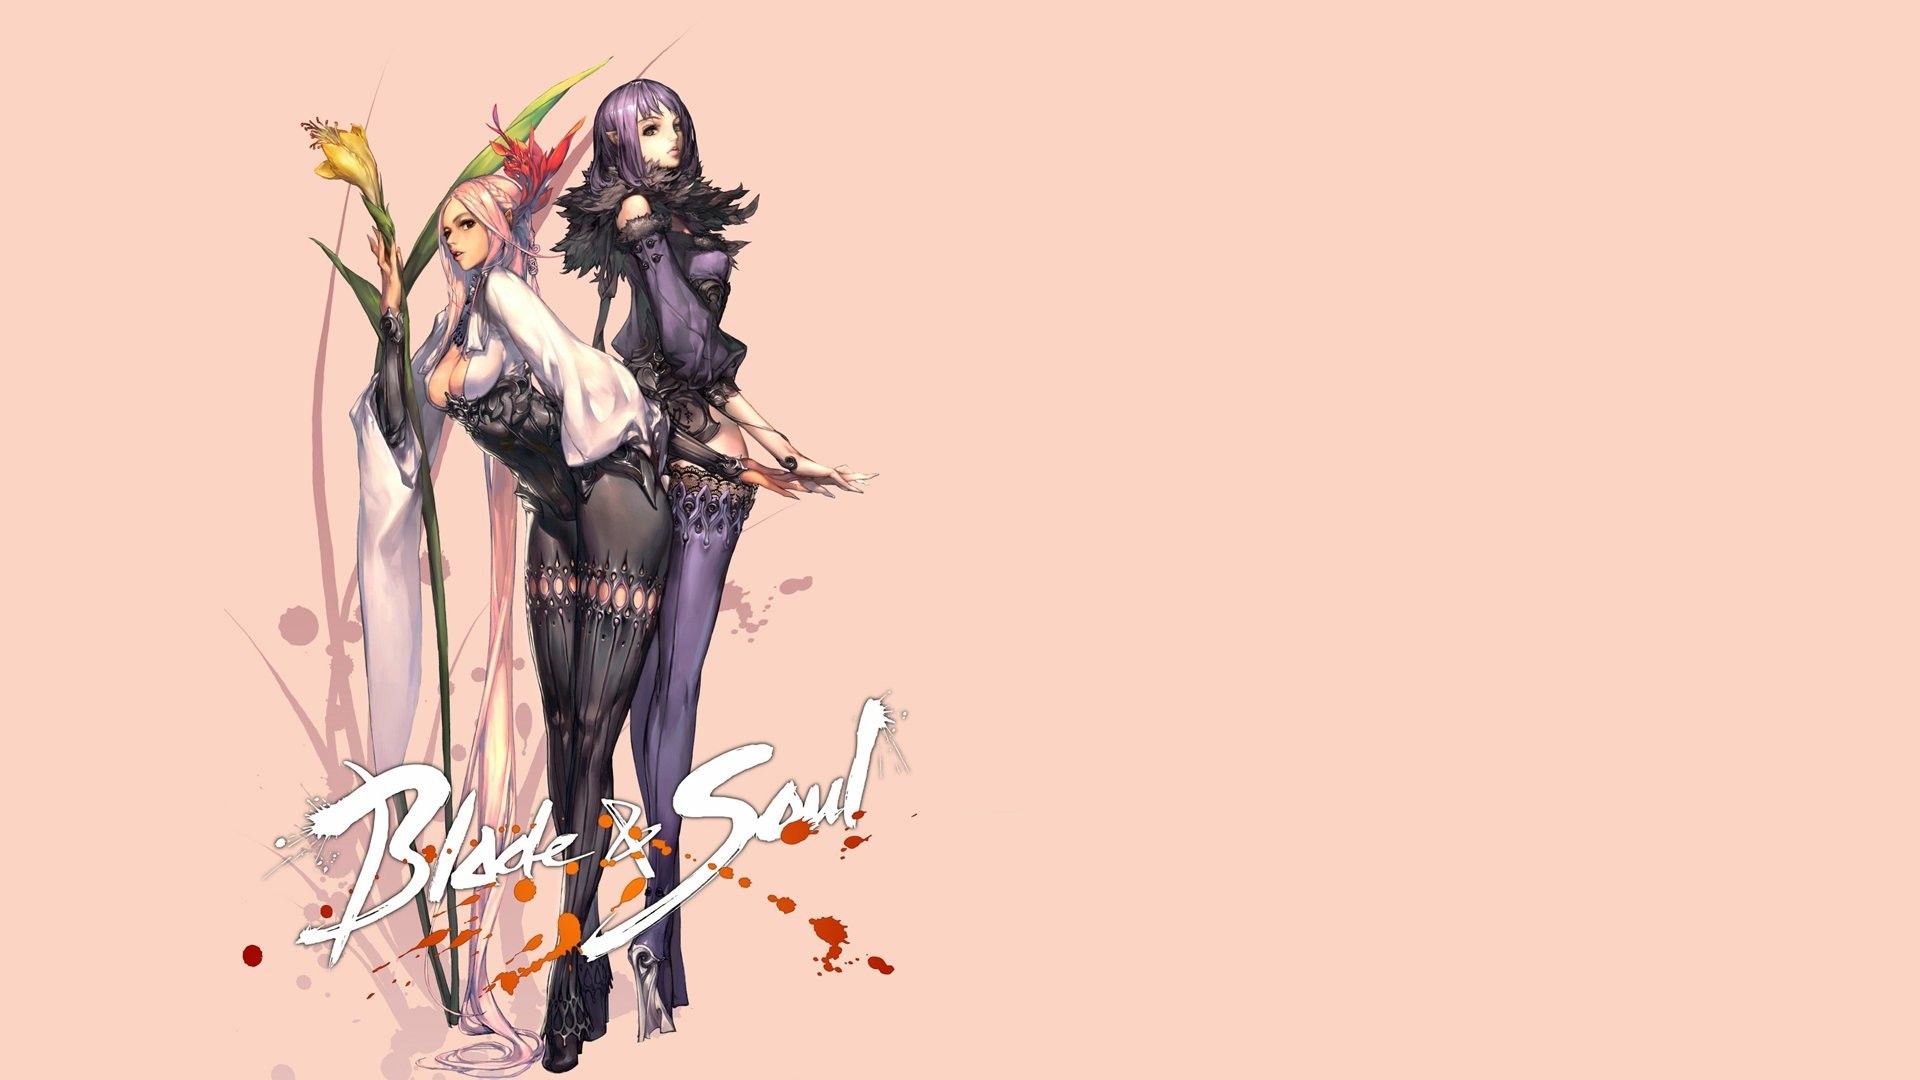 Blade and Soul Anime Wallpaper HD